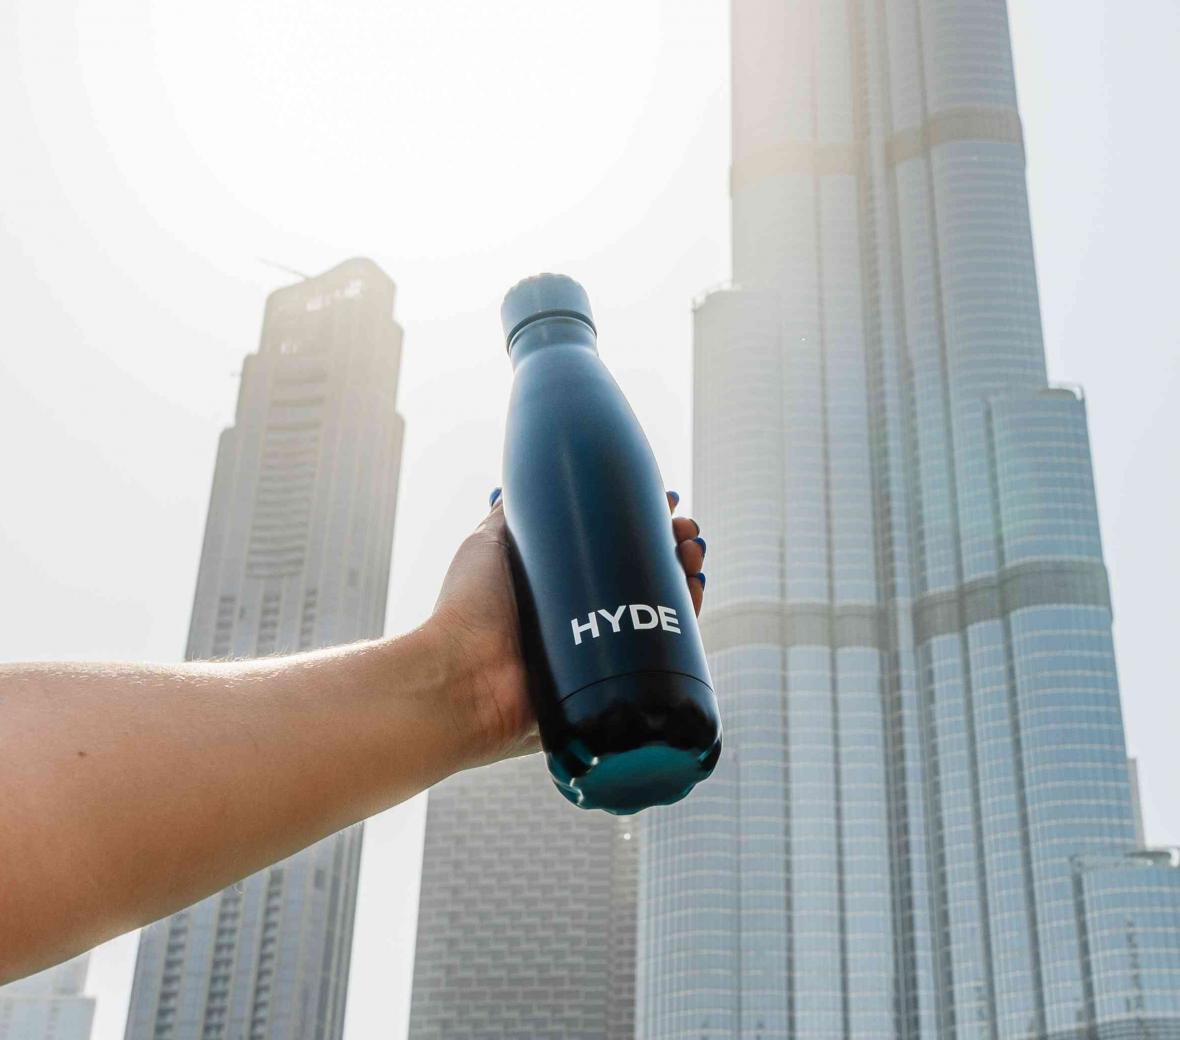 Black water bottle with HYDE written in white being held up by an arm with skyscrapers in the background